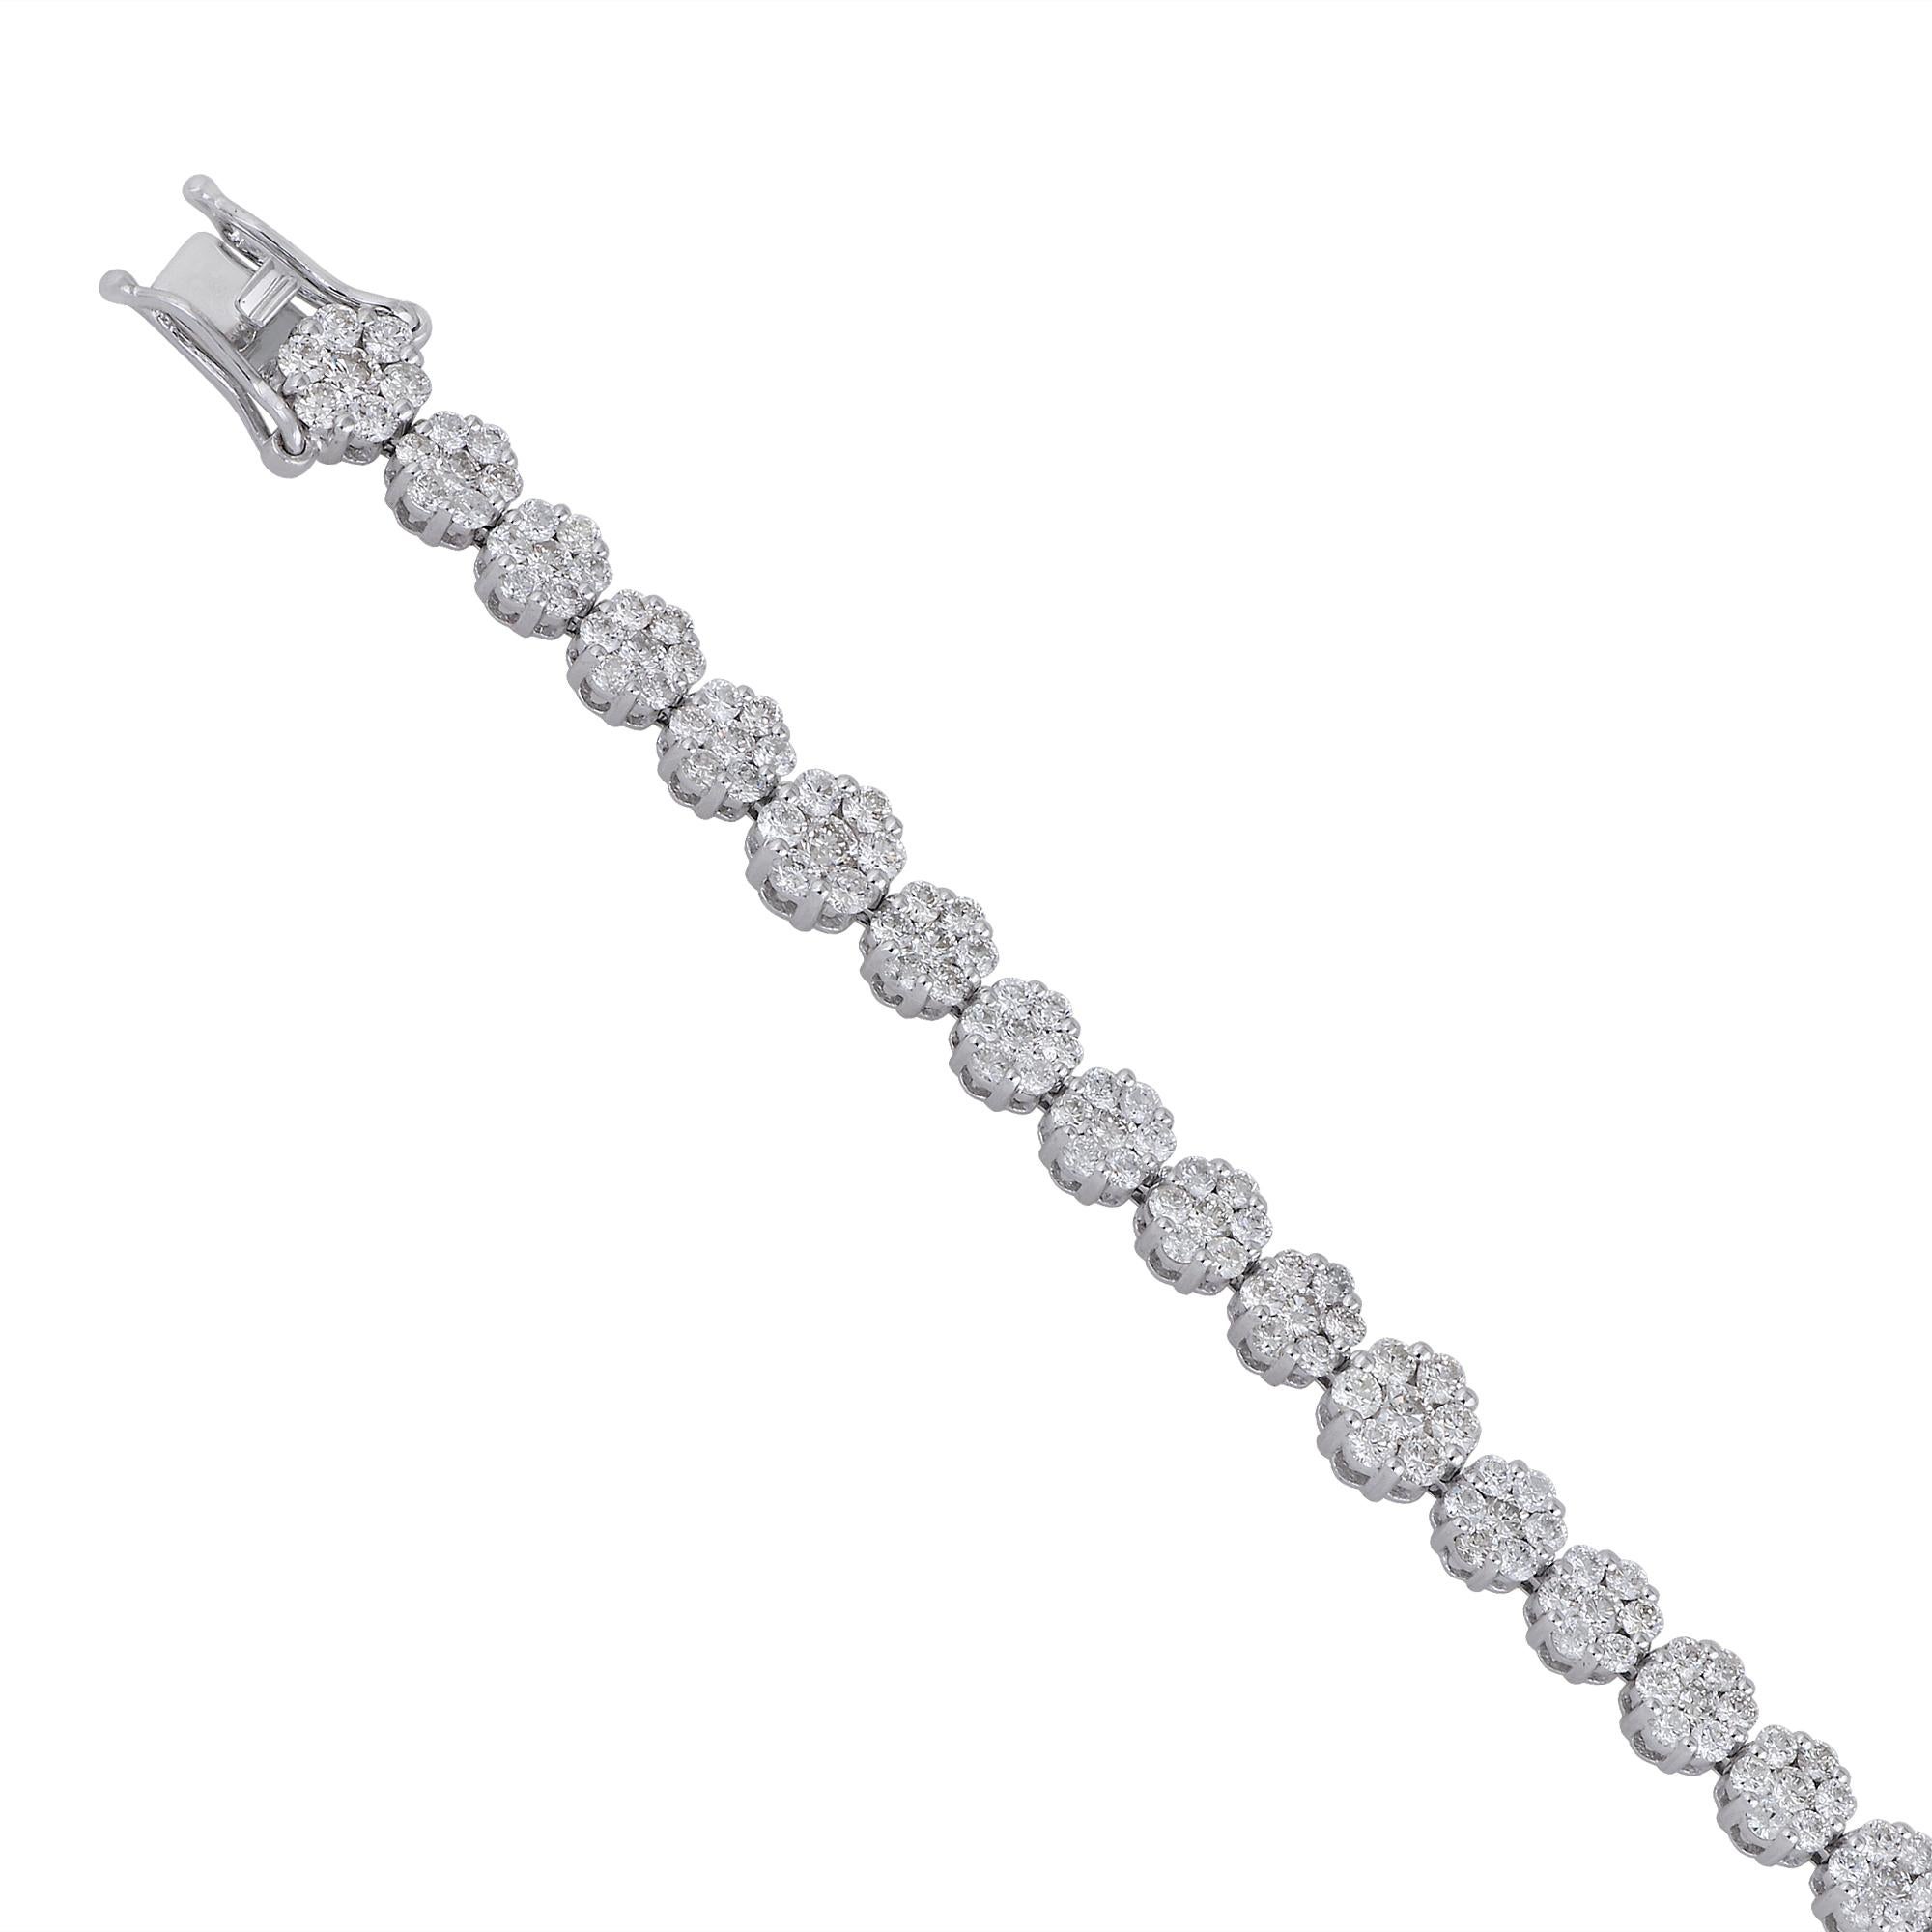 Item Code :- SFBR-4003
Gross Wt. :- 12.47 gm
14k White Gold Wt. :- 11.27 gm
Diamond Wt. :- 6.00 Ct. ( AVERAGE DIAMOND CLARITY SI1-SI2 & COLOR H-I )
Bracelet Length :- 7 Inches Long

✦ Sizing
.....................
We can adjust most items to fit your